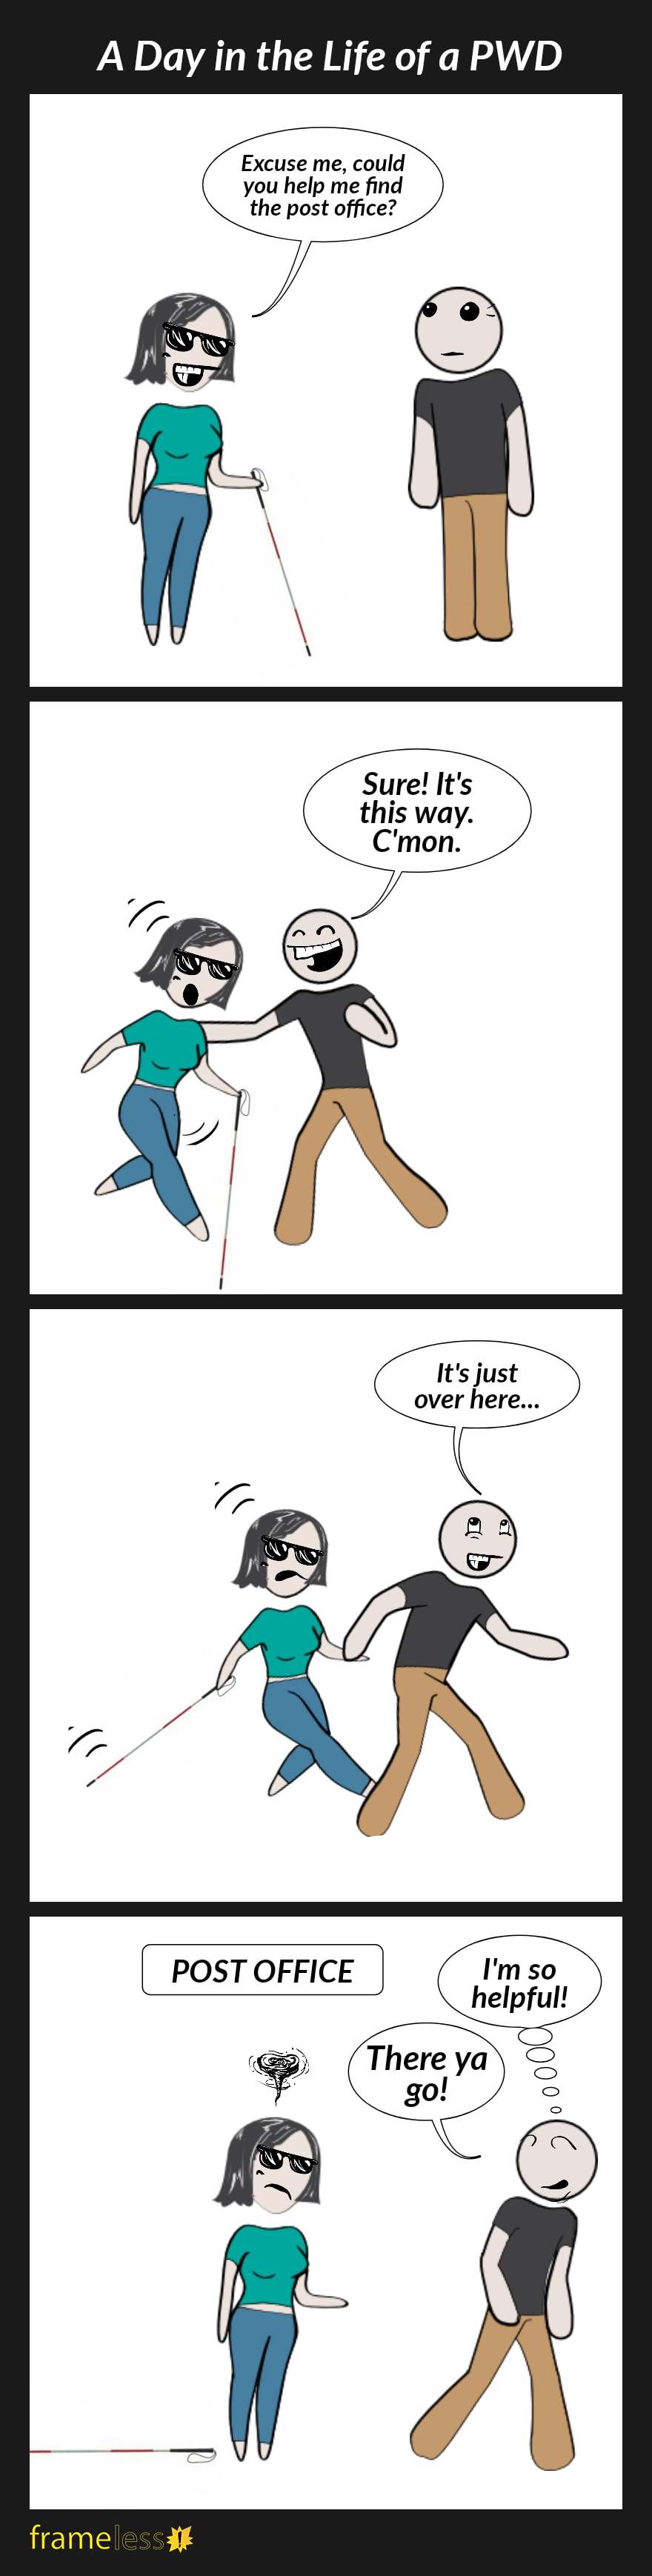 COMIC STRIP
A Day in the Life of a PWD 

Frame 1:
A woman wearing dark glasses and using a white cane approached a man.
WOMAN: Excuse me, could you help me find the post office?

Frame 2:
The man grabs the woman's shoulder, surprising her.
MAN: Sure! It's this way. C'mon. 

Frame 3:
The man pulls the woman behind him by her hand.
MAN: It's just over here...

Frame 4:
They arrive at the post office. The woman, who has dropped her cane, is left feeling frazzled.
MAN (walking away): There ya go!
(thinking to himself) I'm so helpful!